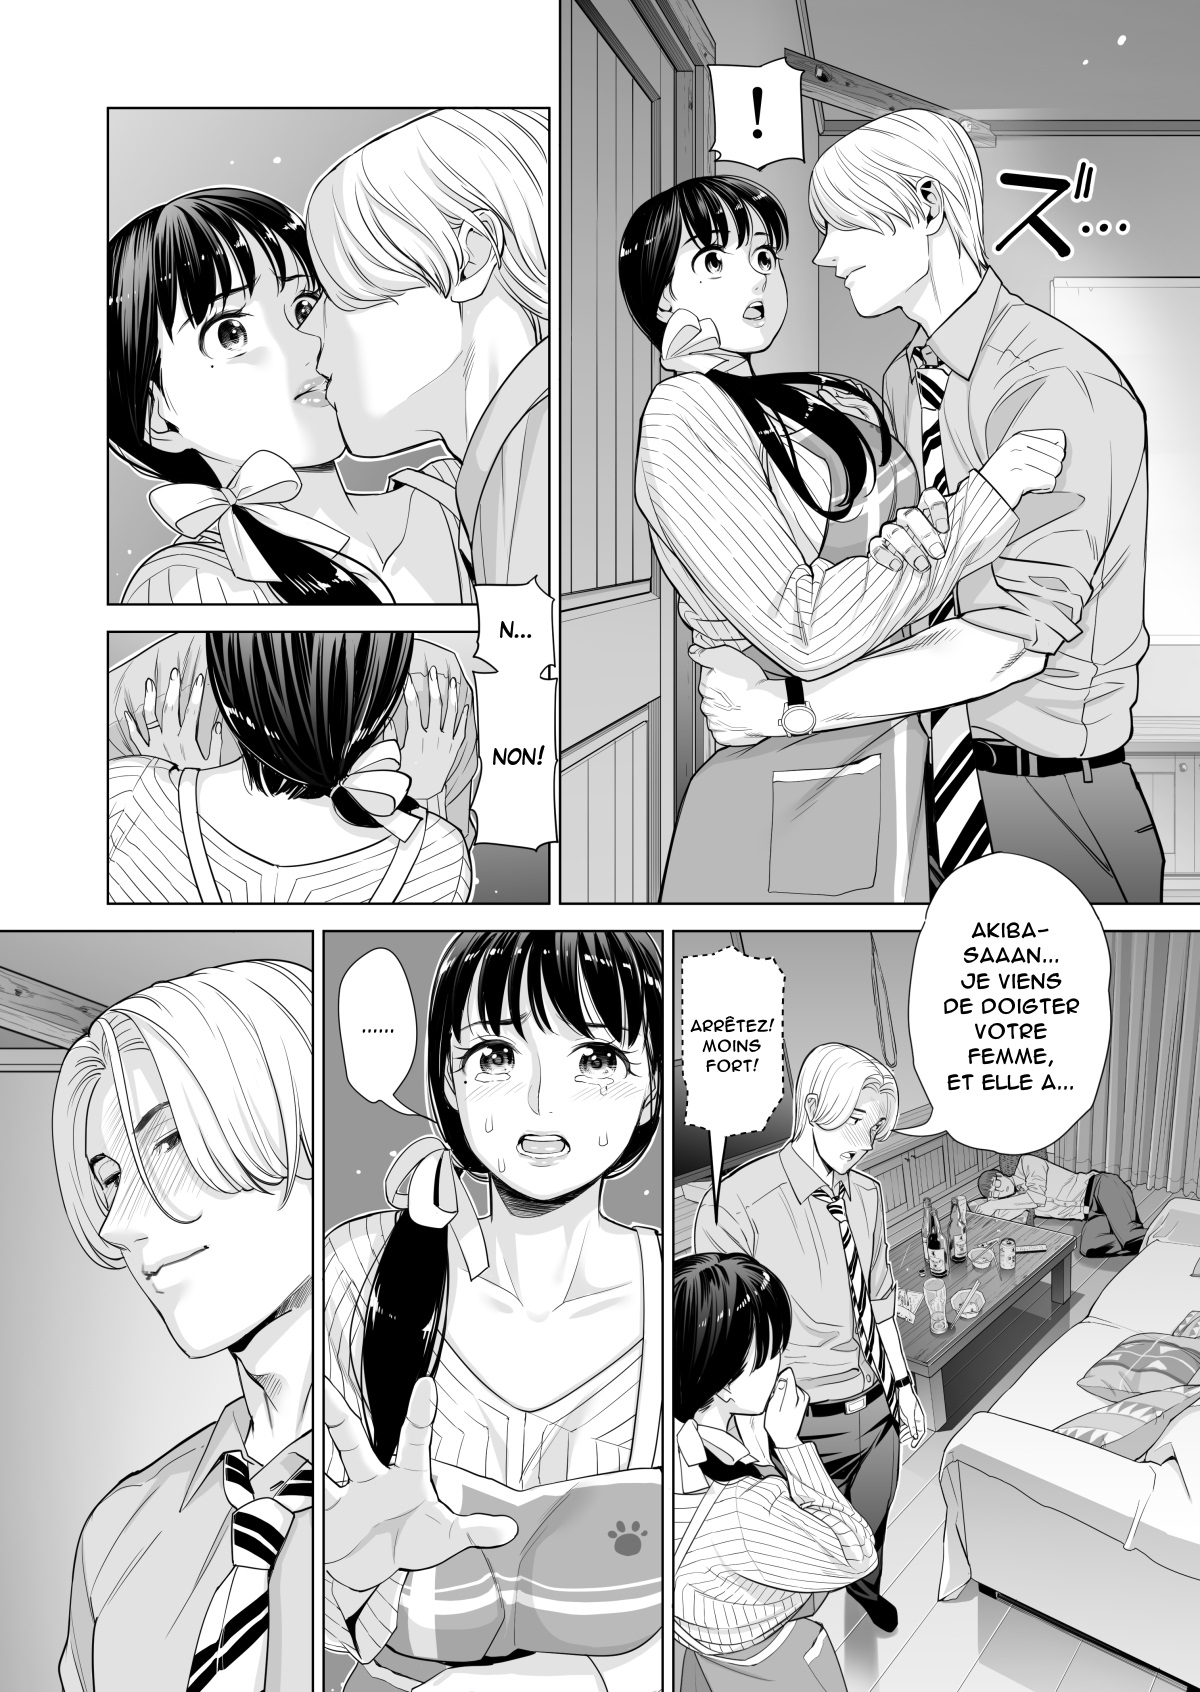 Tsukiyo no Midare Zake  Moonlit Intoxication ~ A Housewife Stolen by a Coworker Besides her Blackout Drunk Husband ~ Chapter 1 numero d'image 38